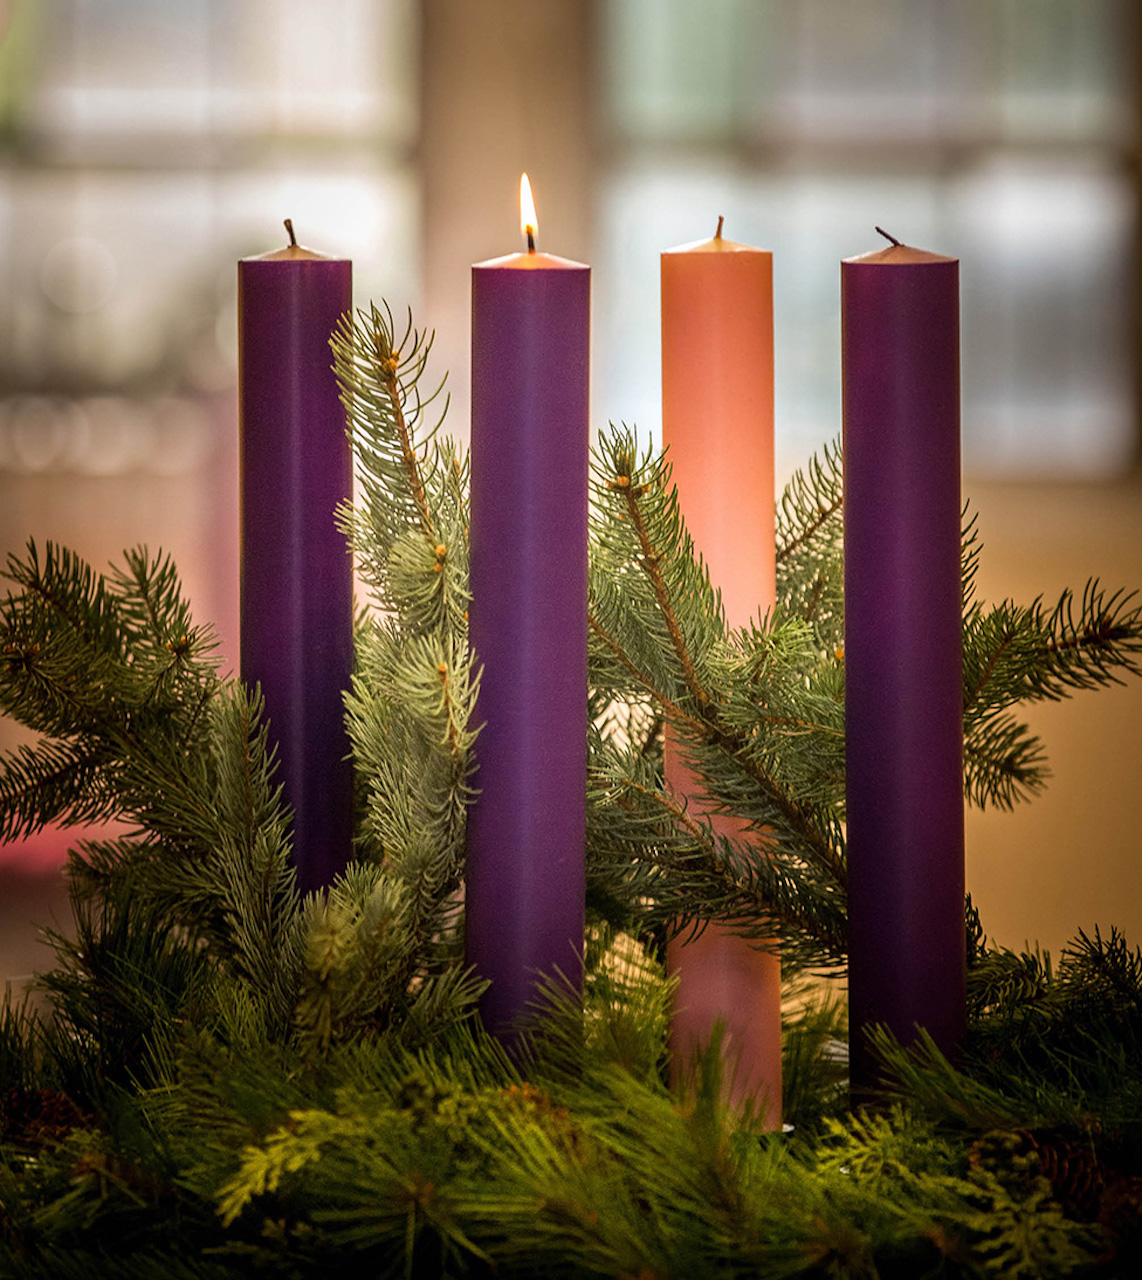 1st candle of Advent Wreath is glowing